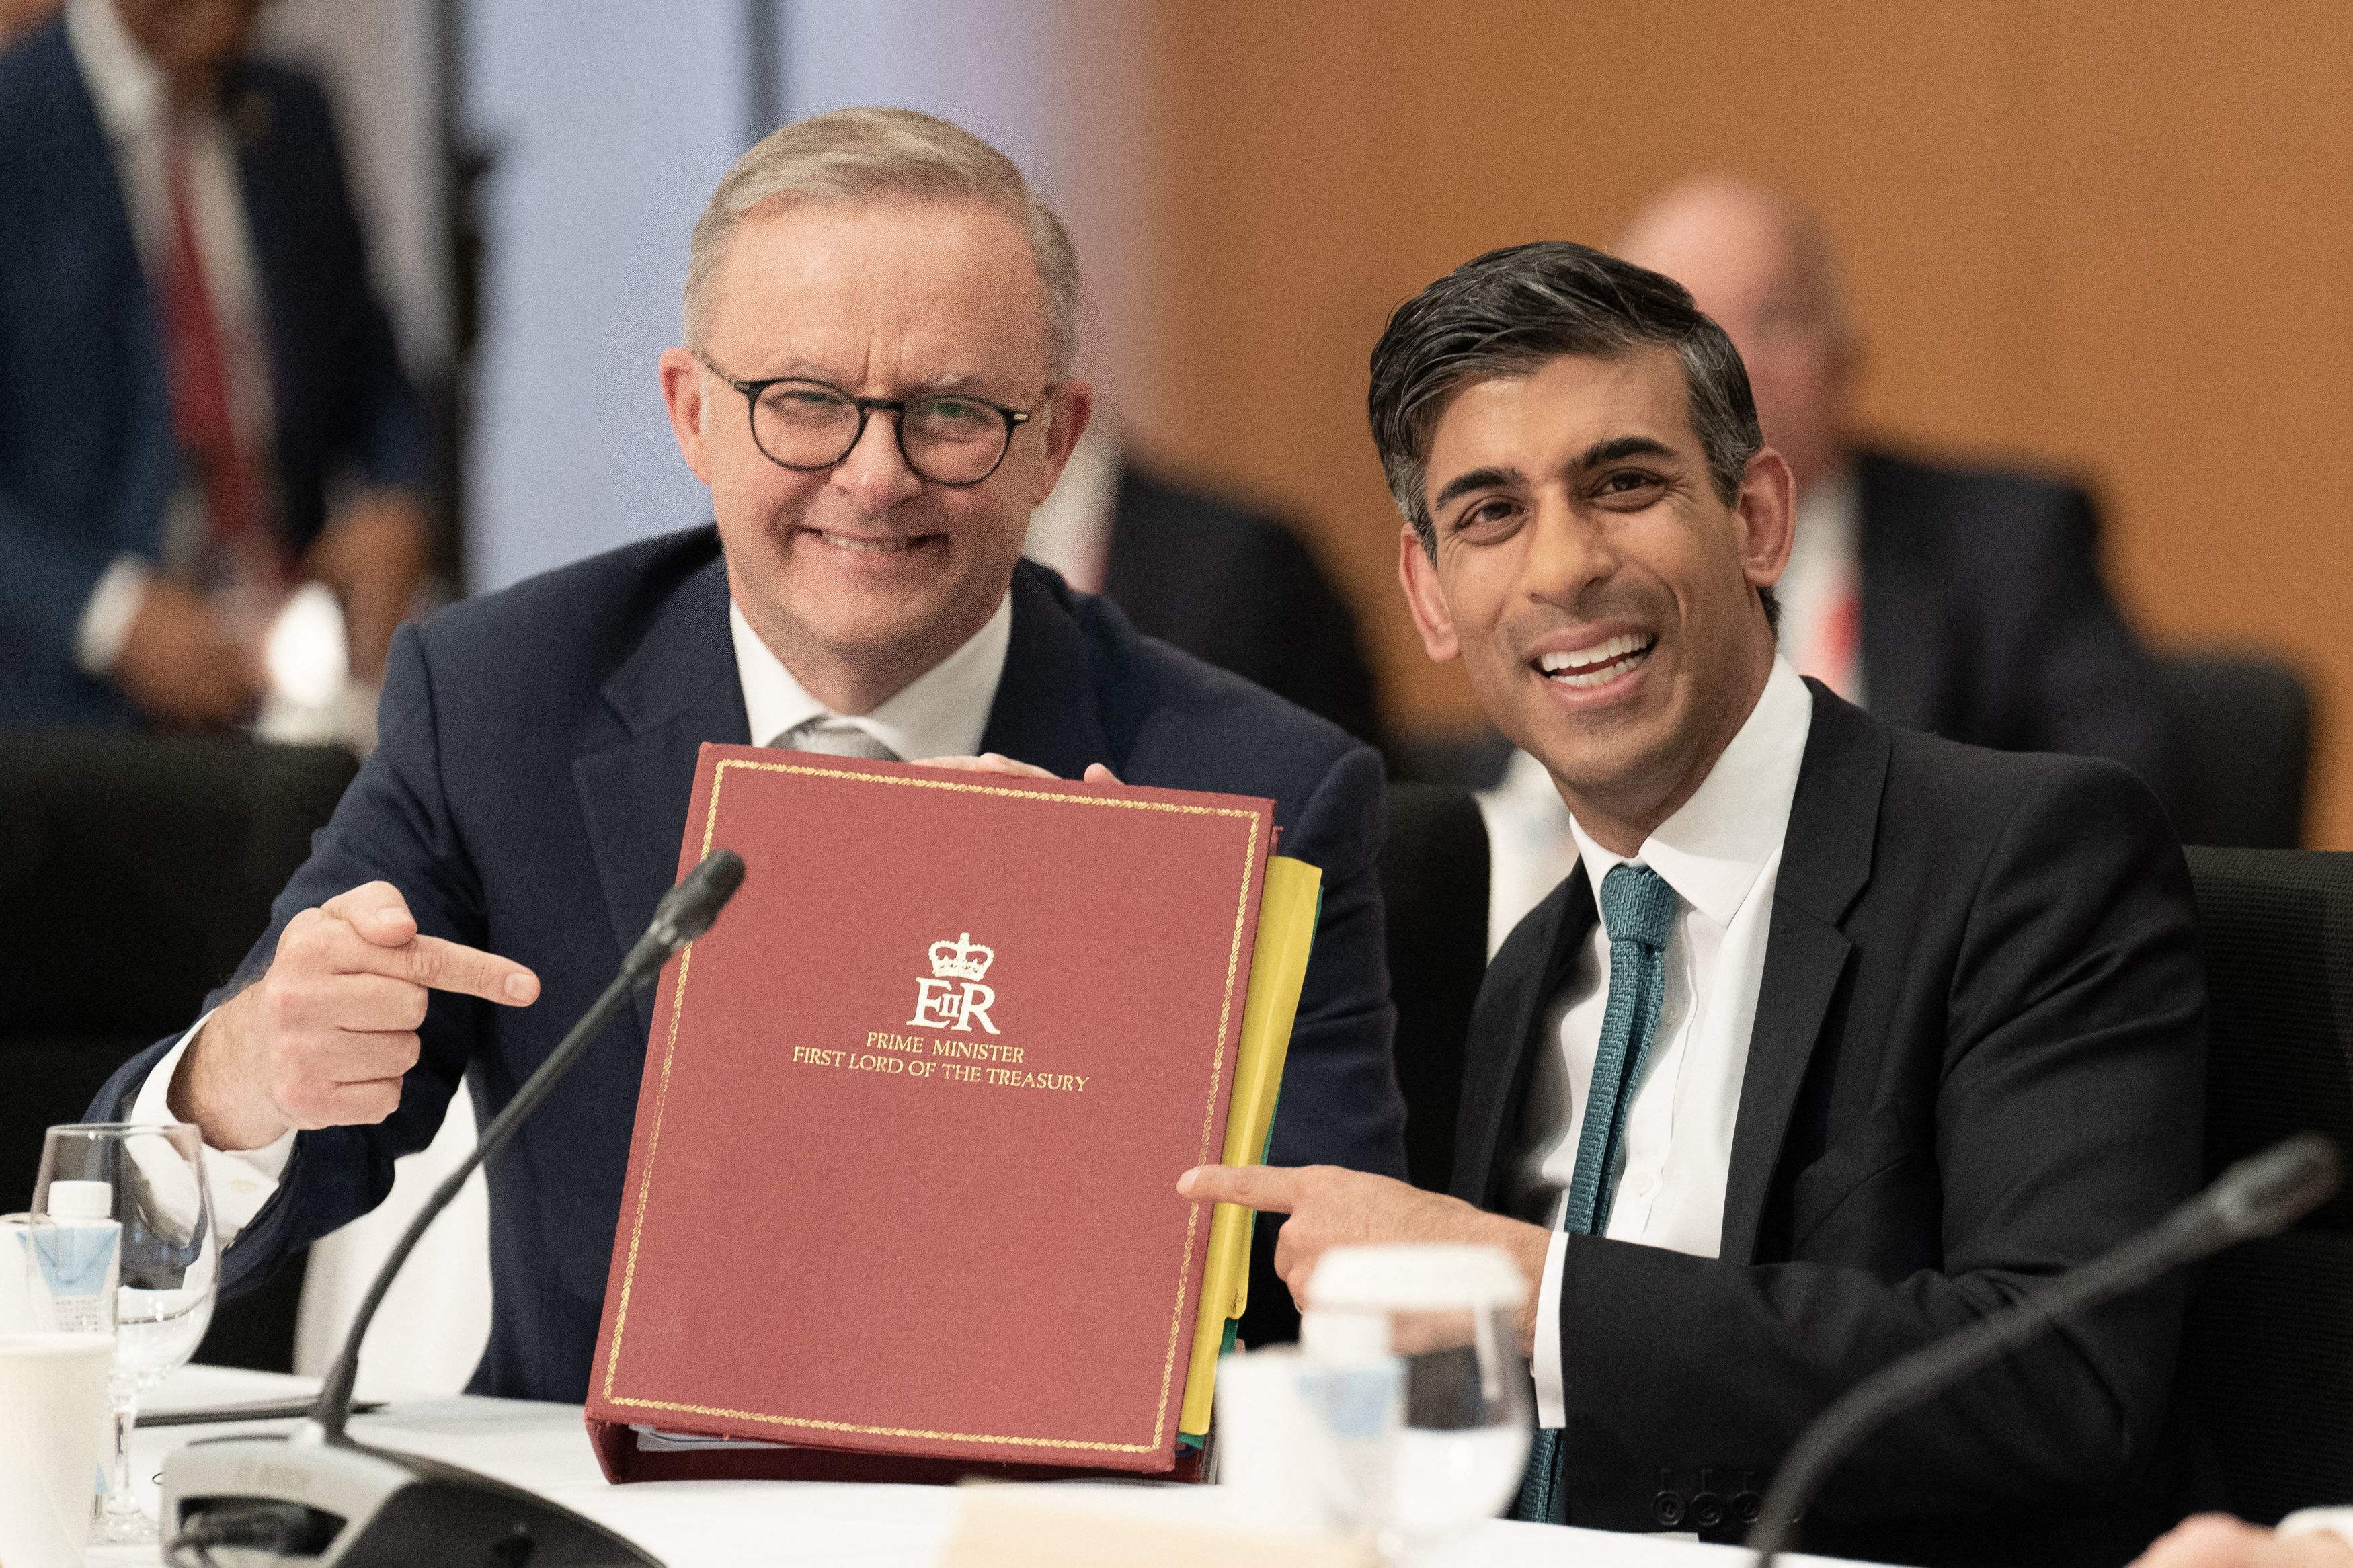 Australia's prime Minister Anthony Albanese (L) holds British prime minister Rishi Sunak's ministerial folder at a working session during the G7 Leaders' Summit in Hiroshima